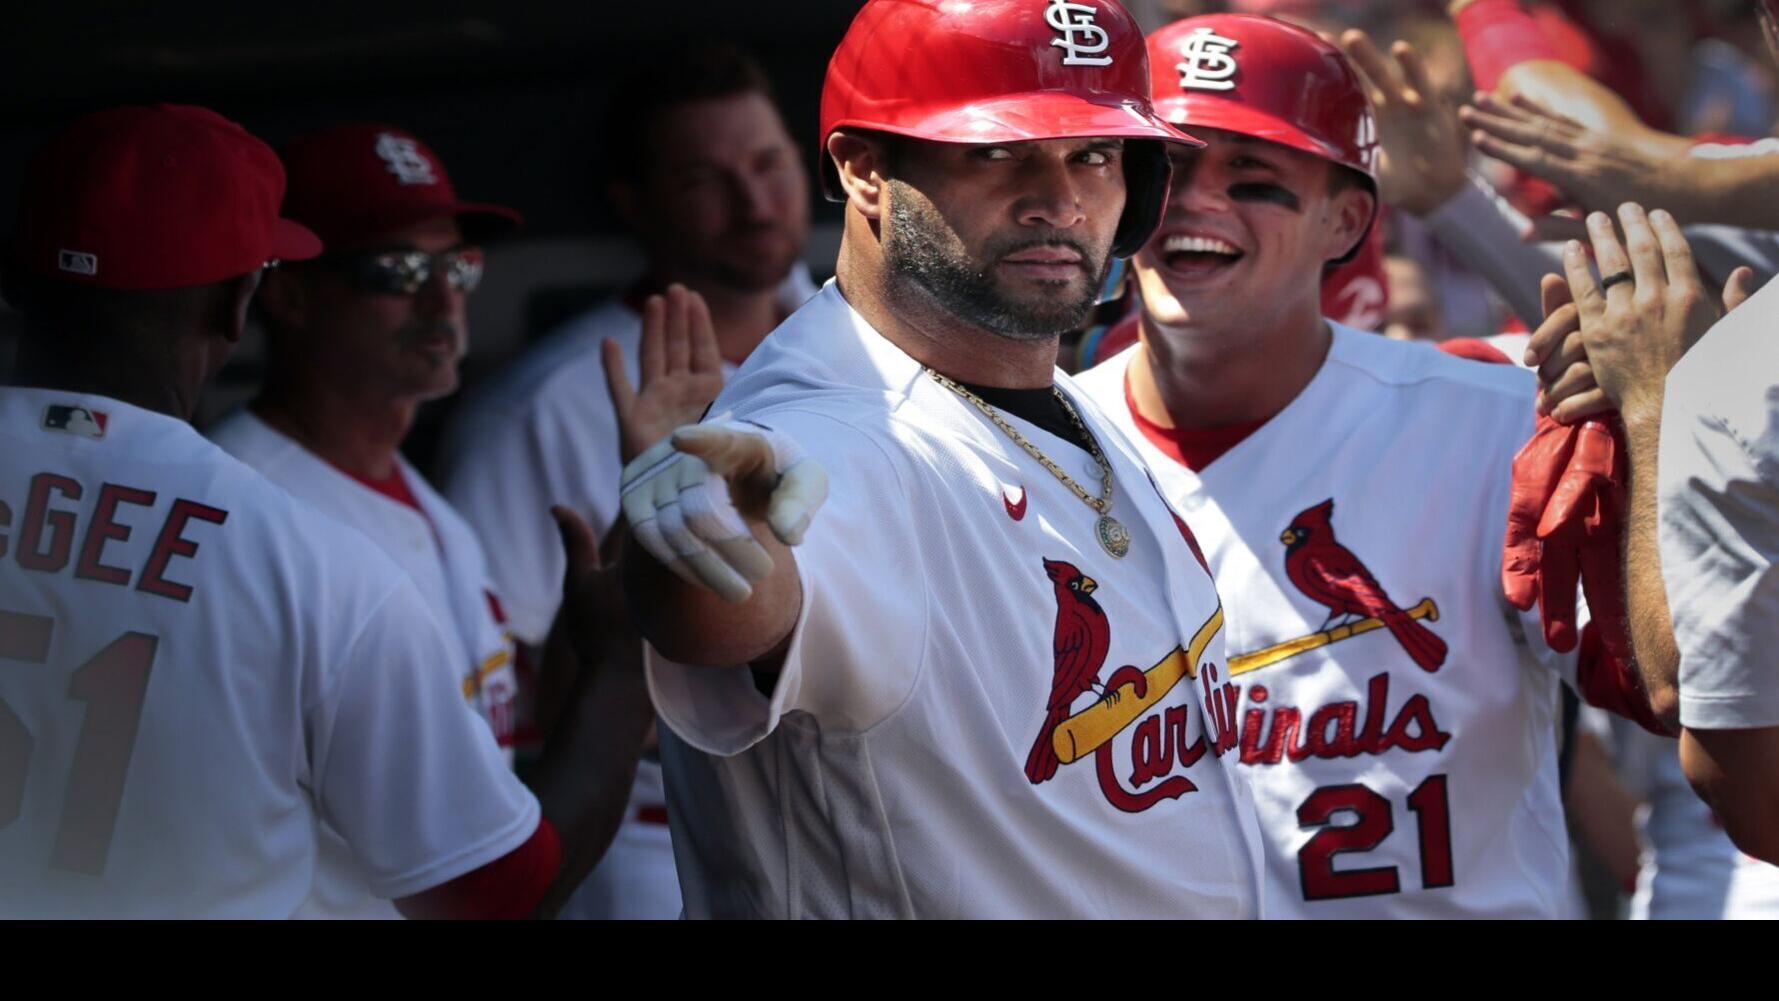 Wainwright masterpiece is overshadowed by Pujols as Cardinals win in a romp